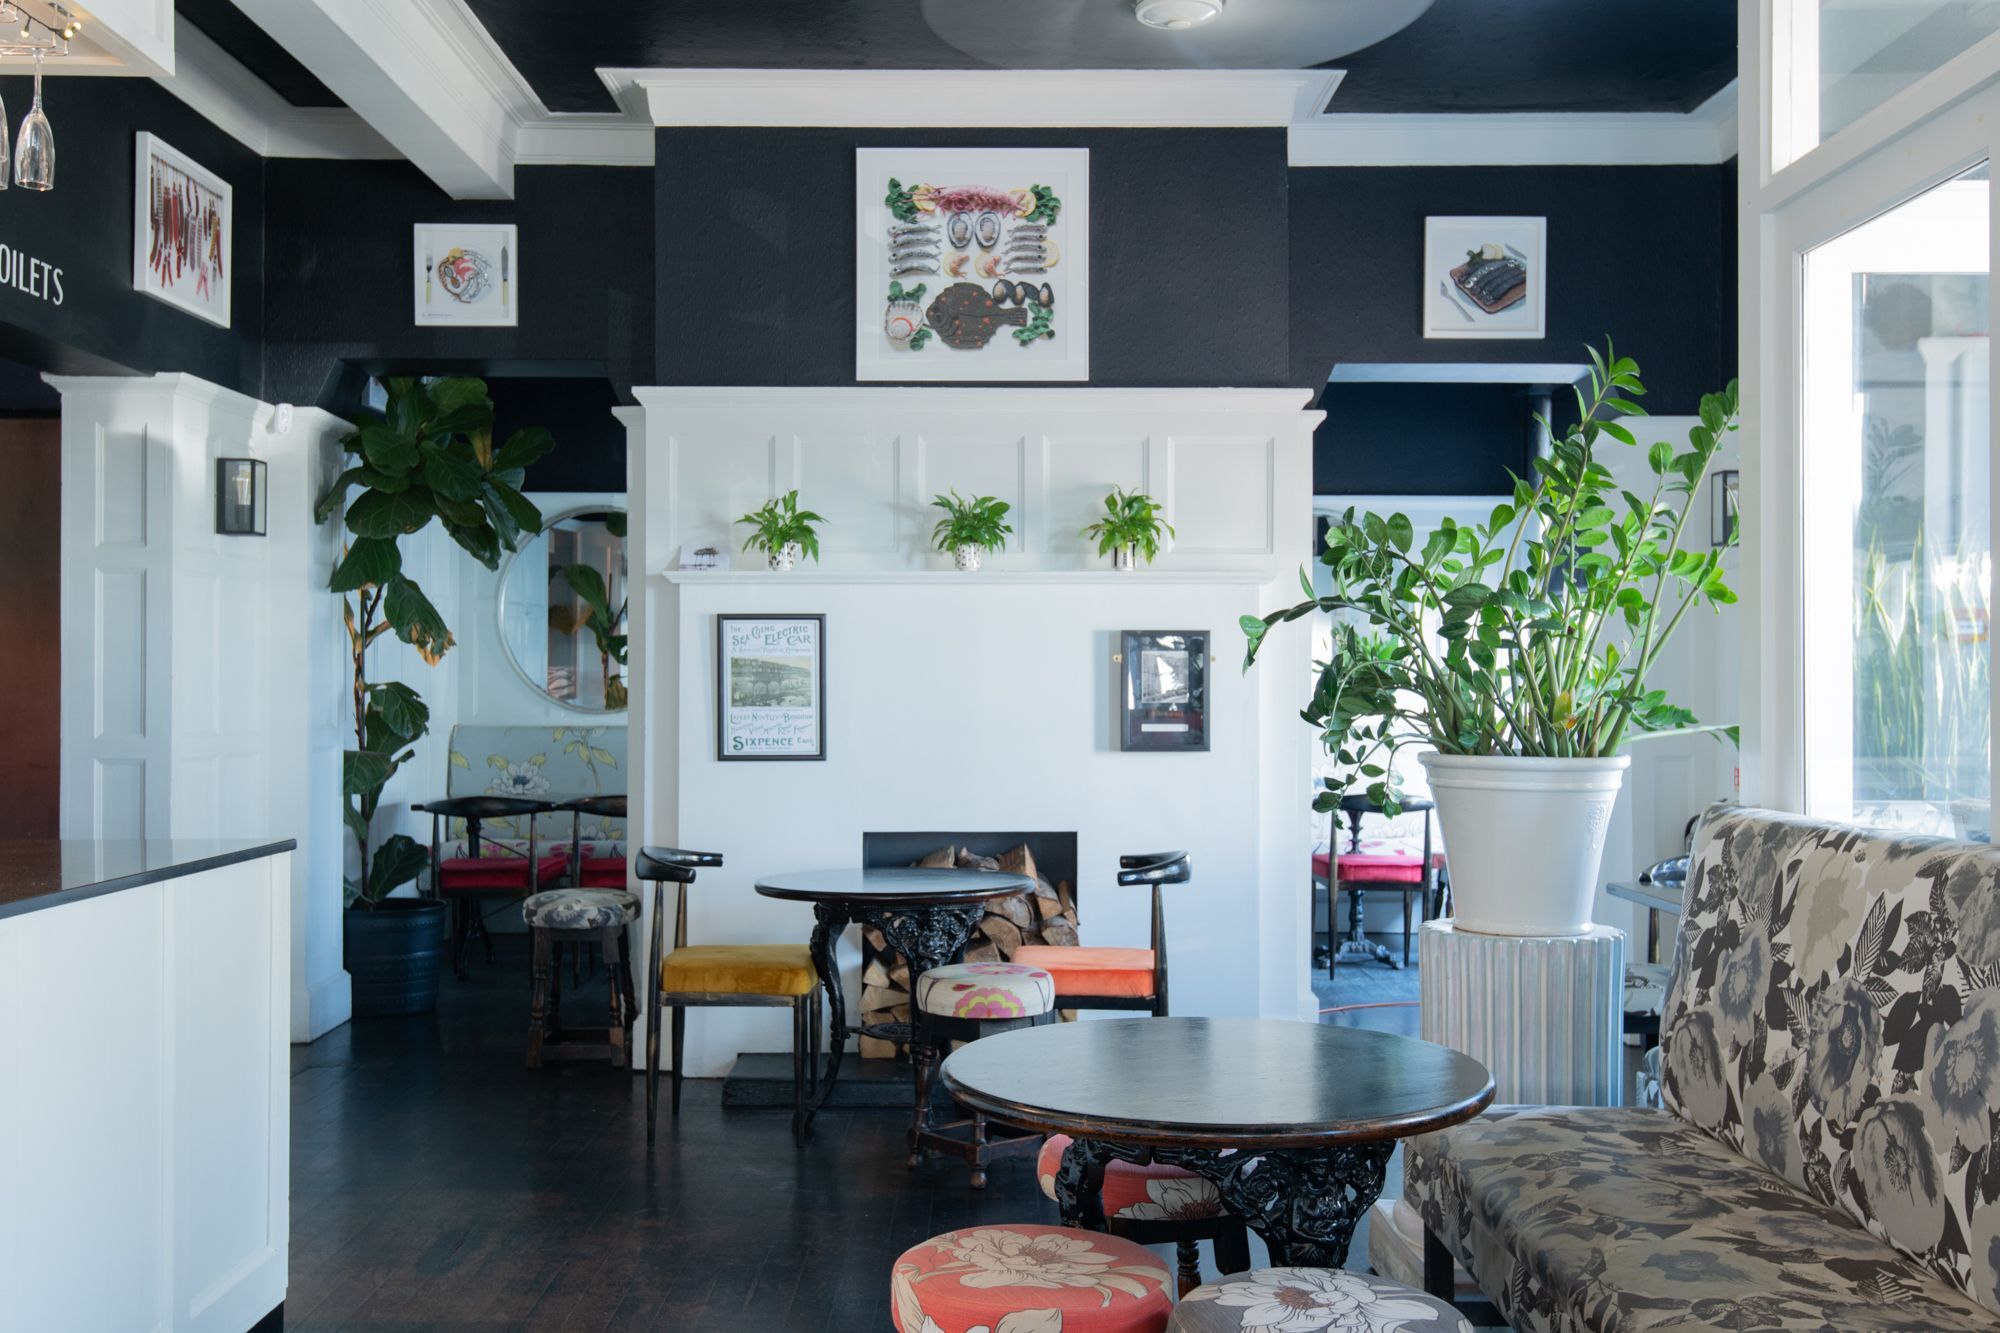 black and white walls of the daddylonglegs pub, plants decoration on the wall, dark brown tables, orange and pink chairs, flower decorated diners